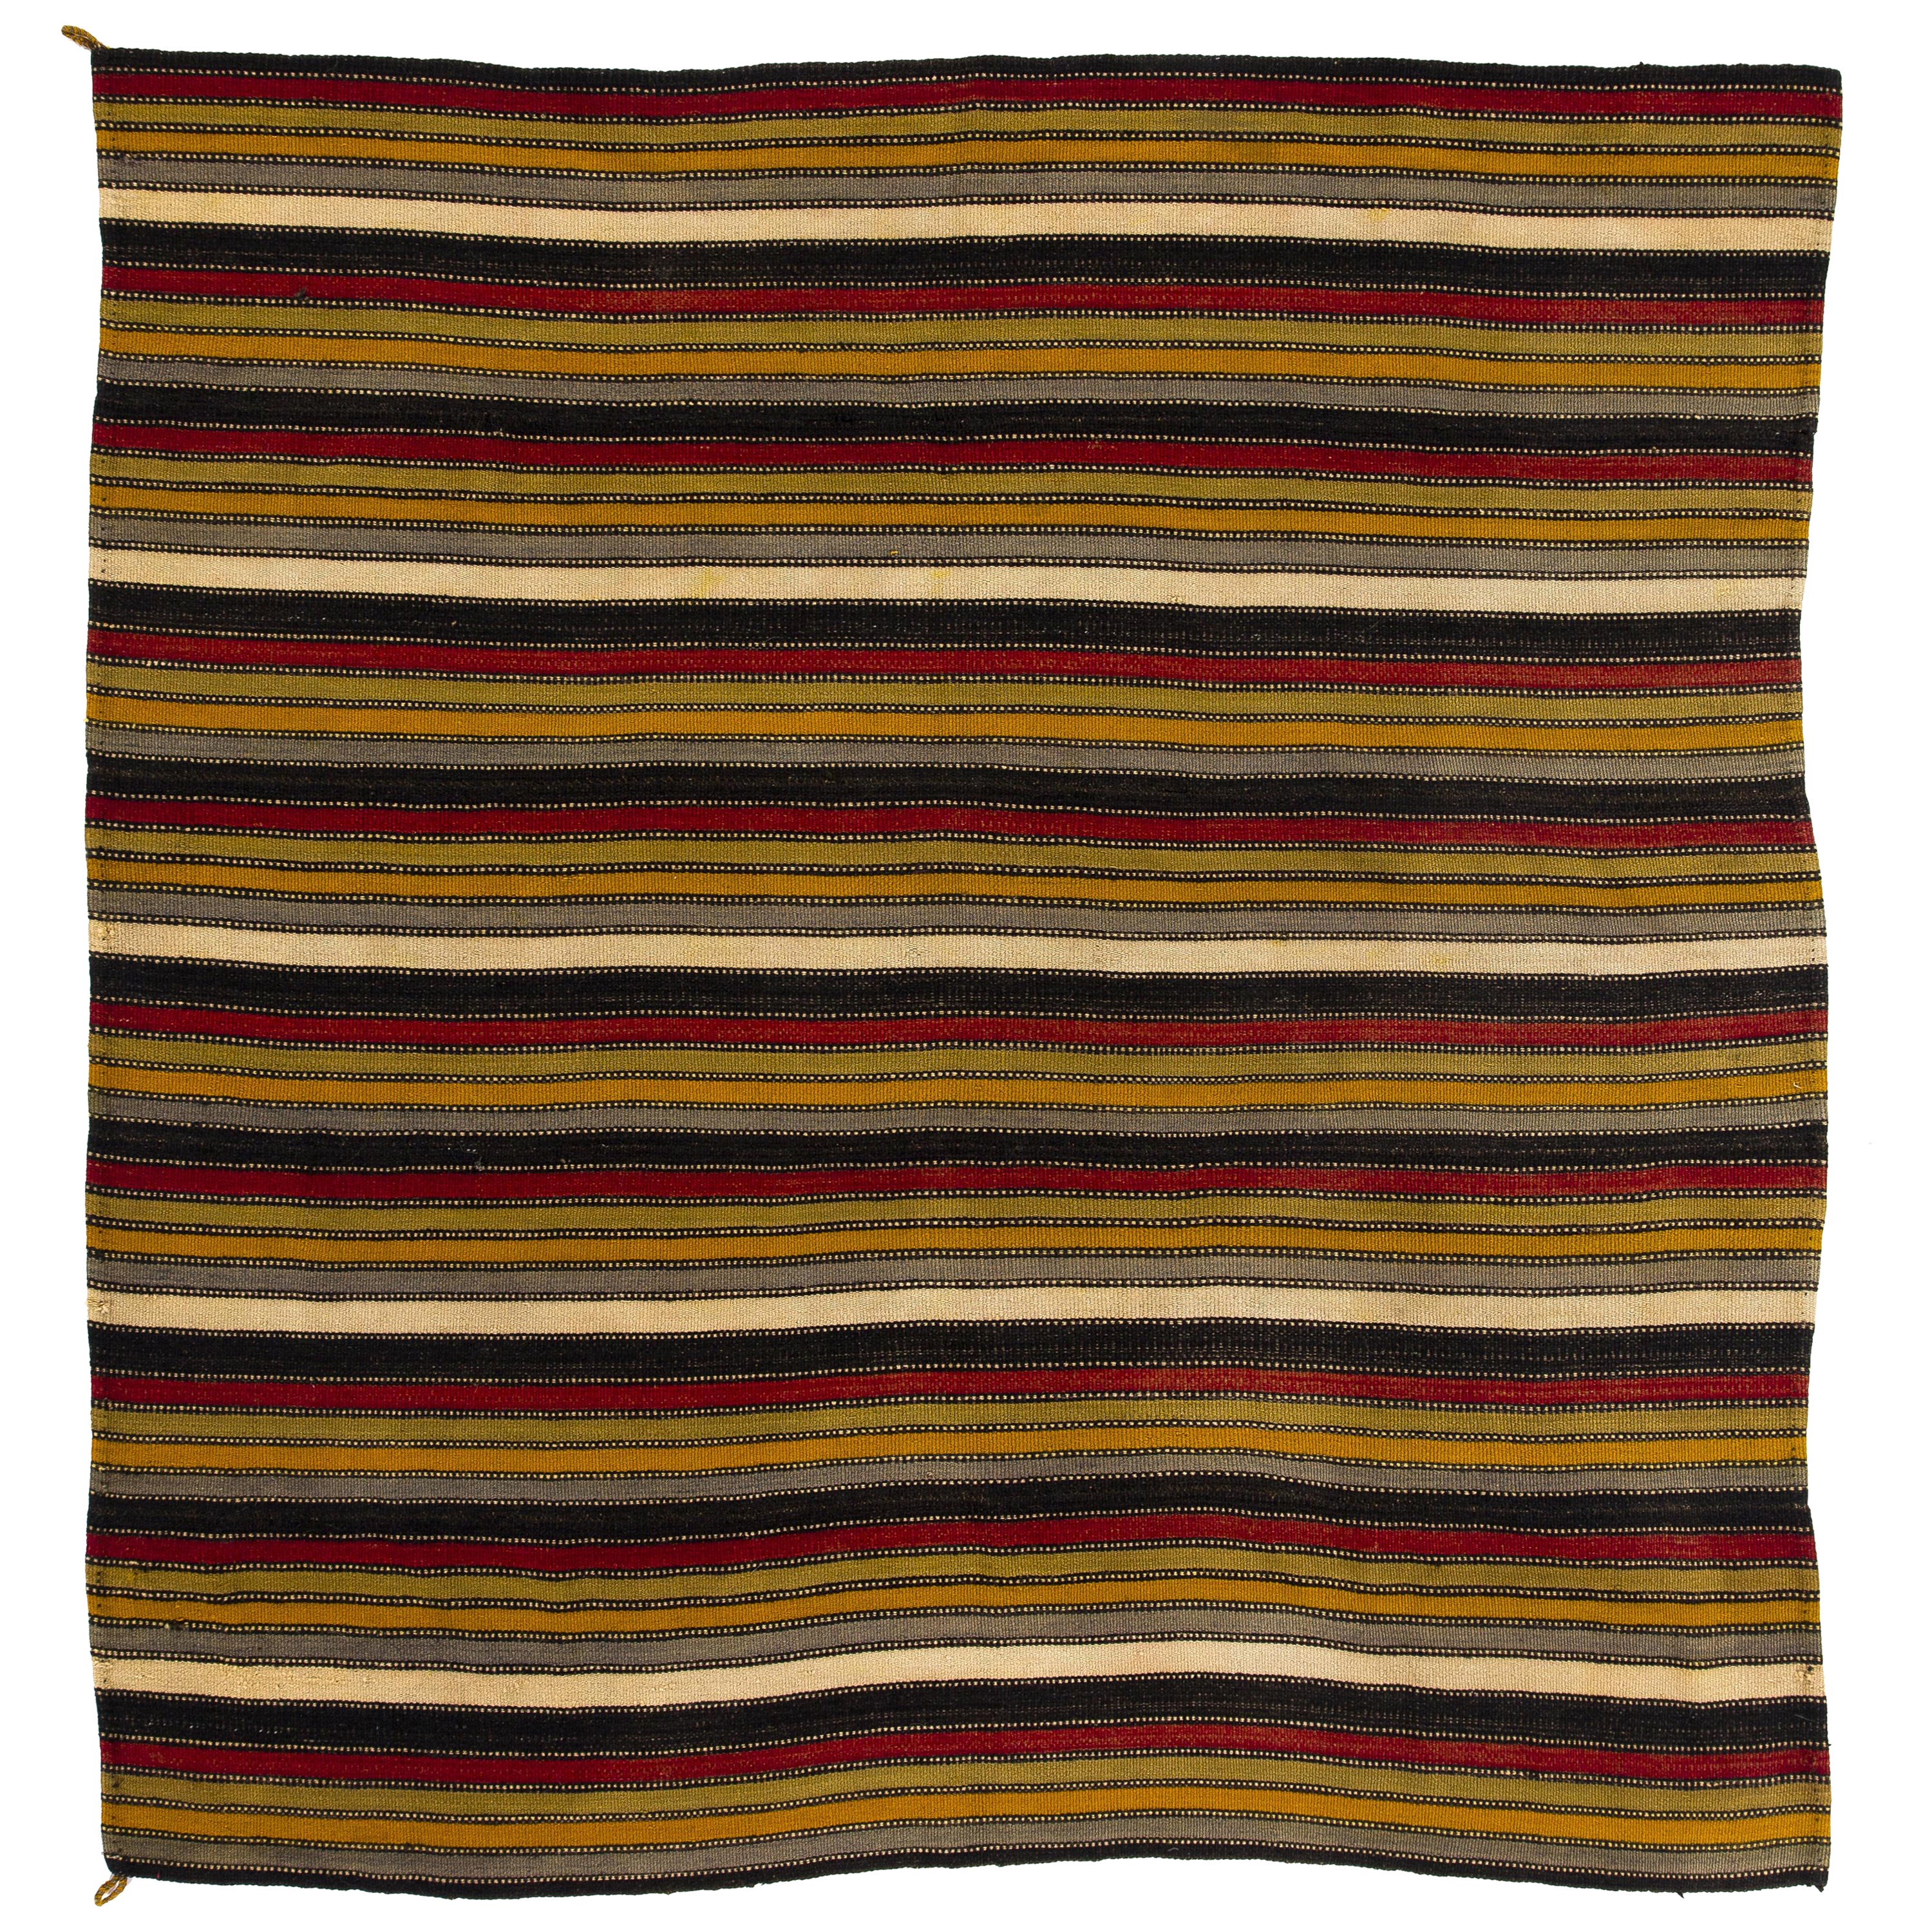 5.7x5.9 Ft Handwoven Striped Vintage Anatolian Kilim, Flat-weave Rug, 100% Wool For Sale